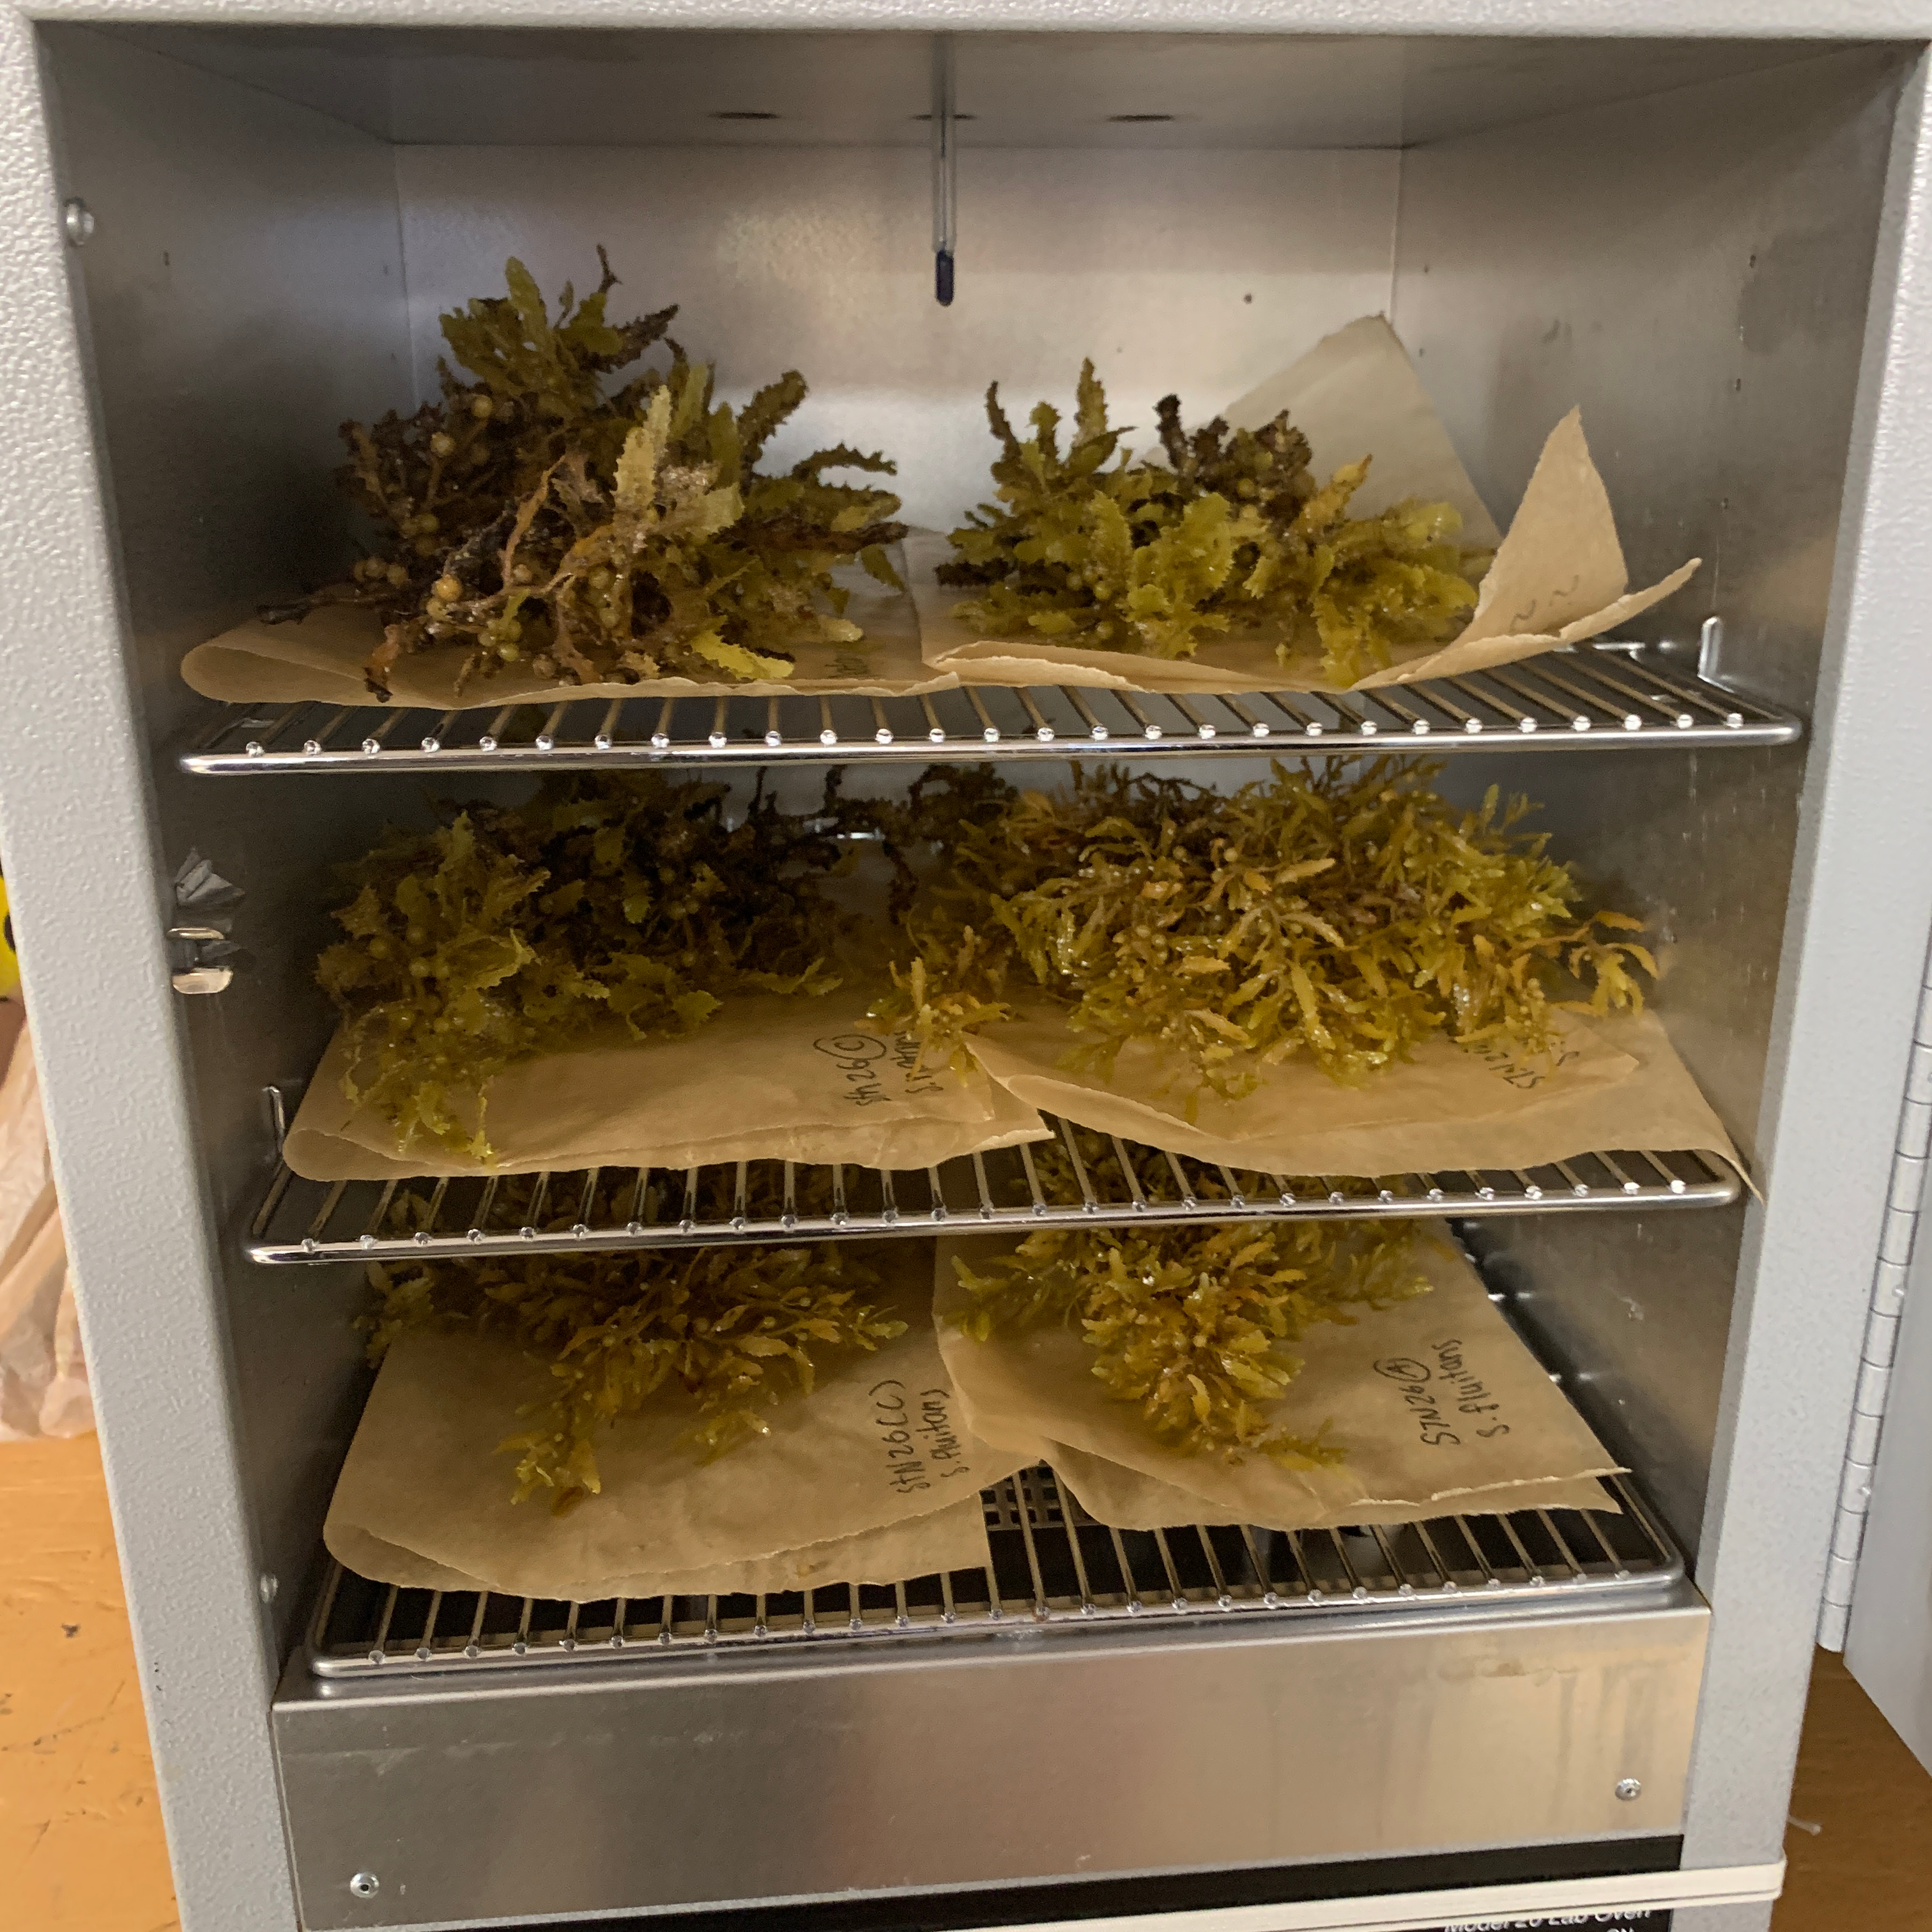 Sorted Sargassum drying in the oven to preserve for further analysis (Photo by Ellen Park)